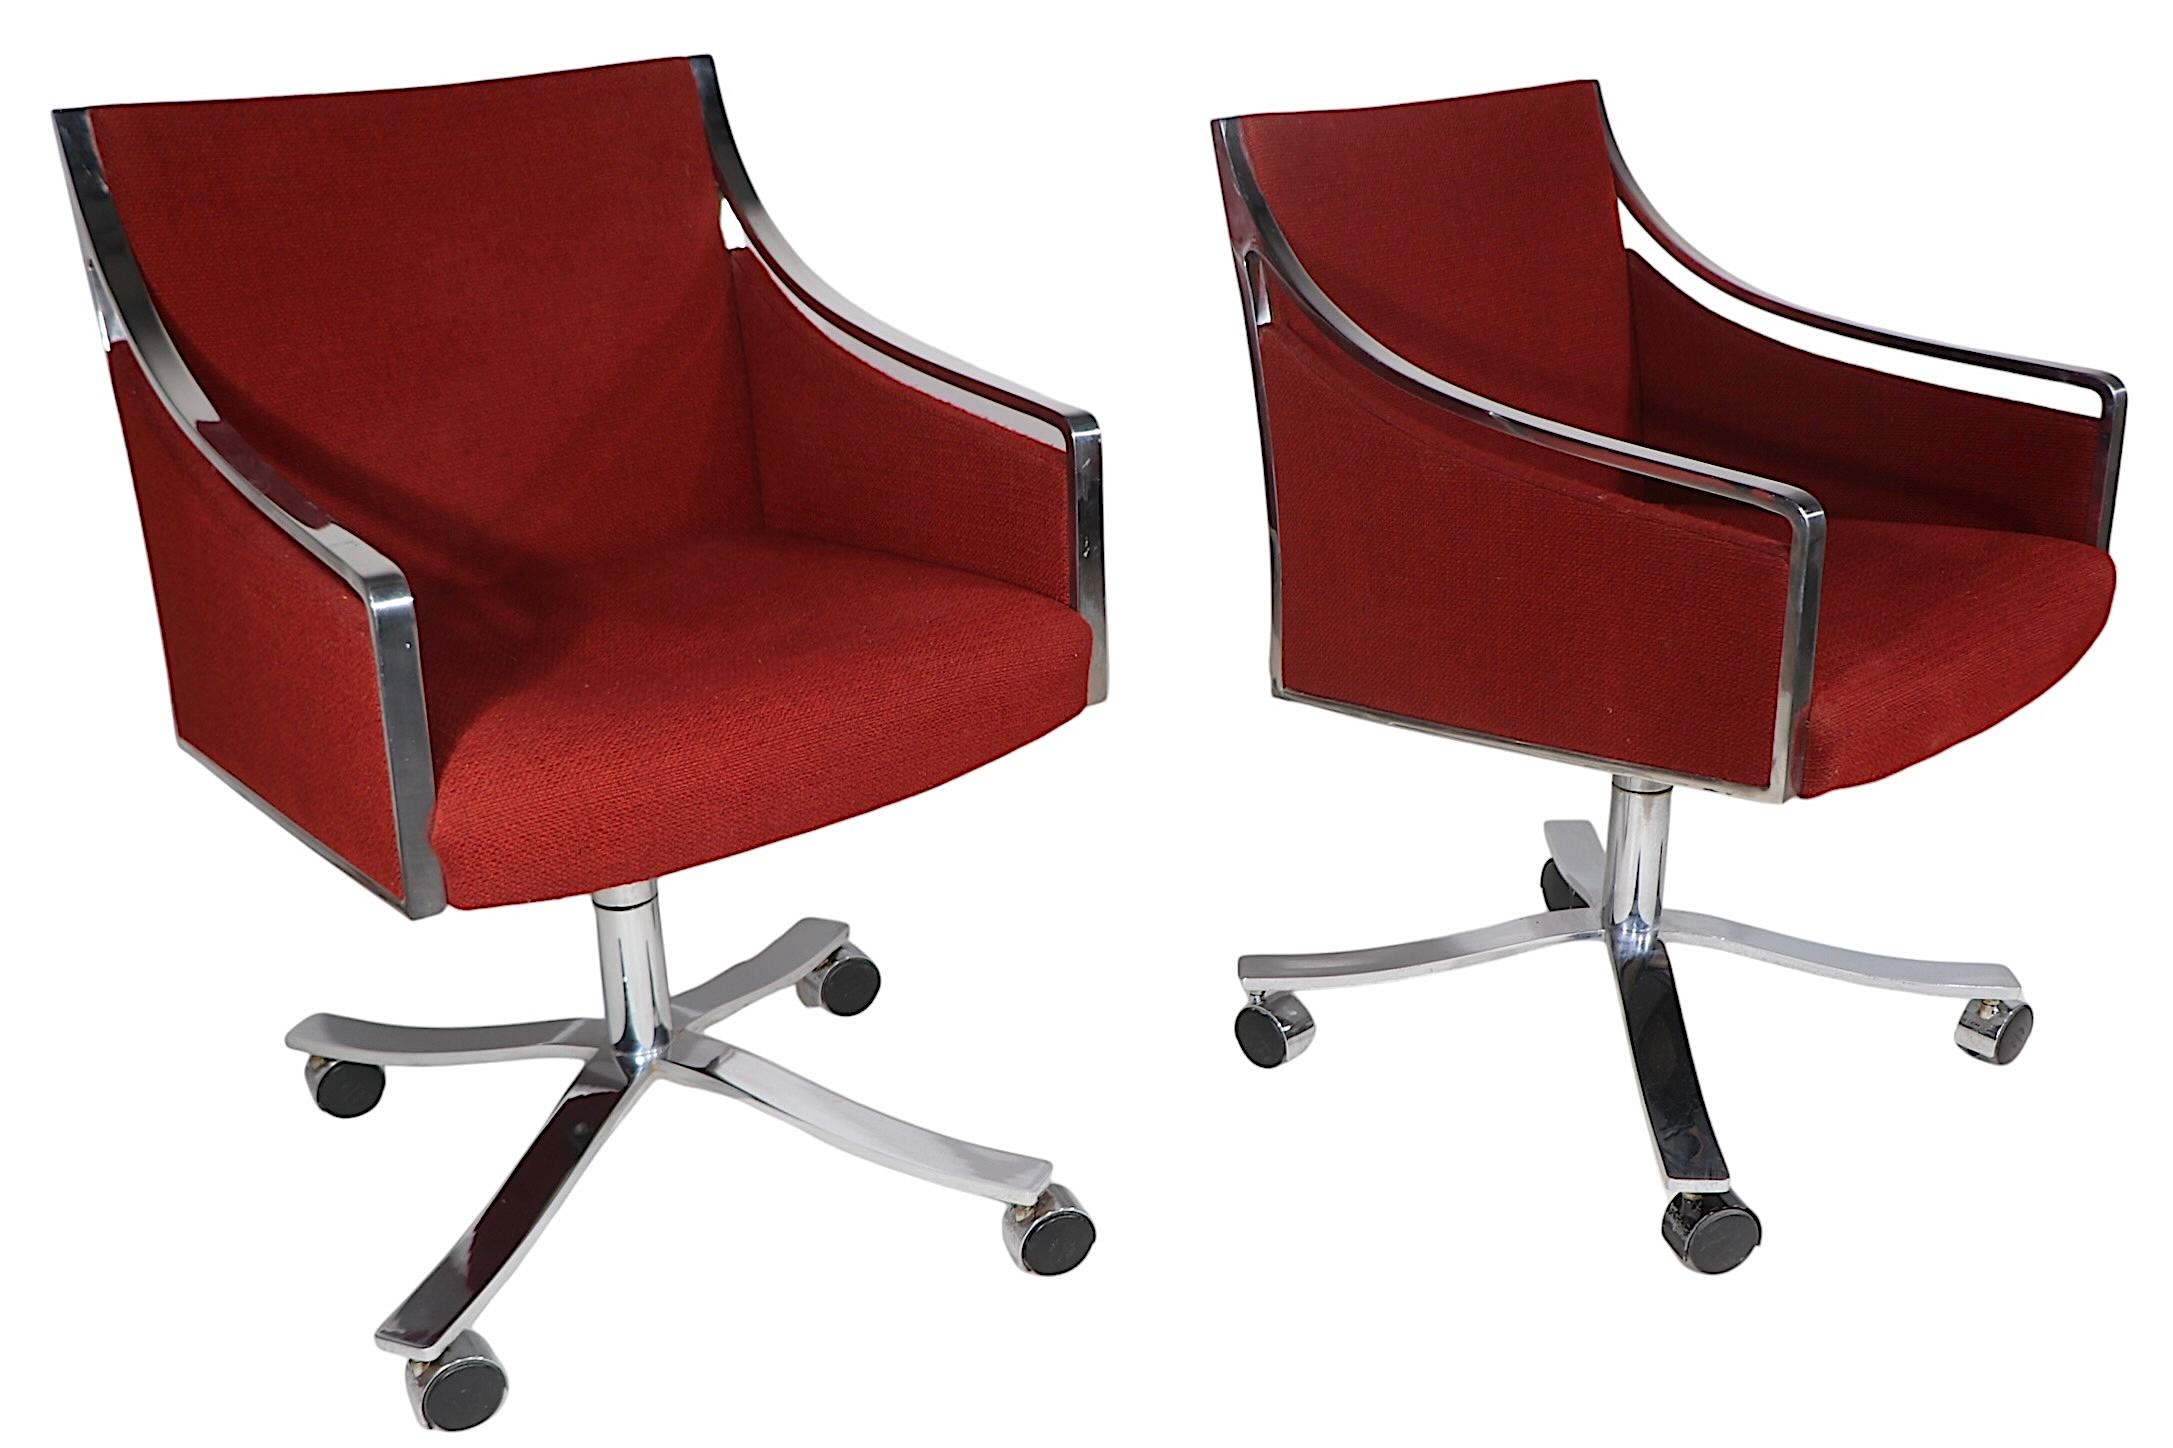 High end swivel desk chairs designed by Bert England for Stow Davis, circa 1970's. The chairs feature heavy bright steel frames, bases and legs, with original fabric upholstered backs and seats. The chairs tilt, and  swivel a full 360 degrees, the